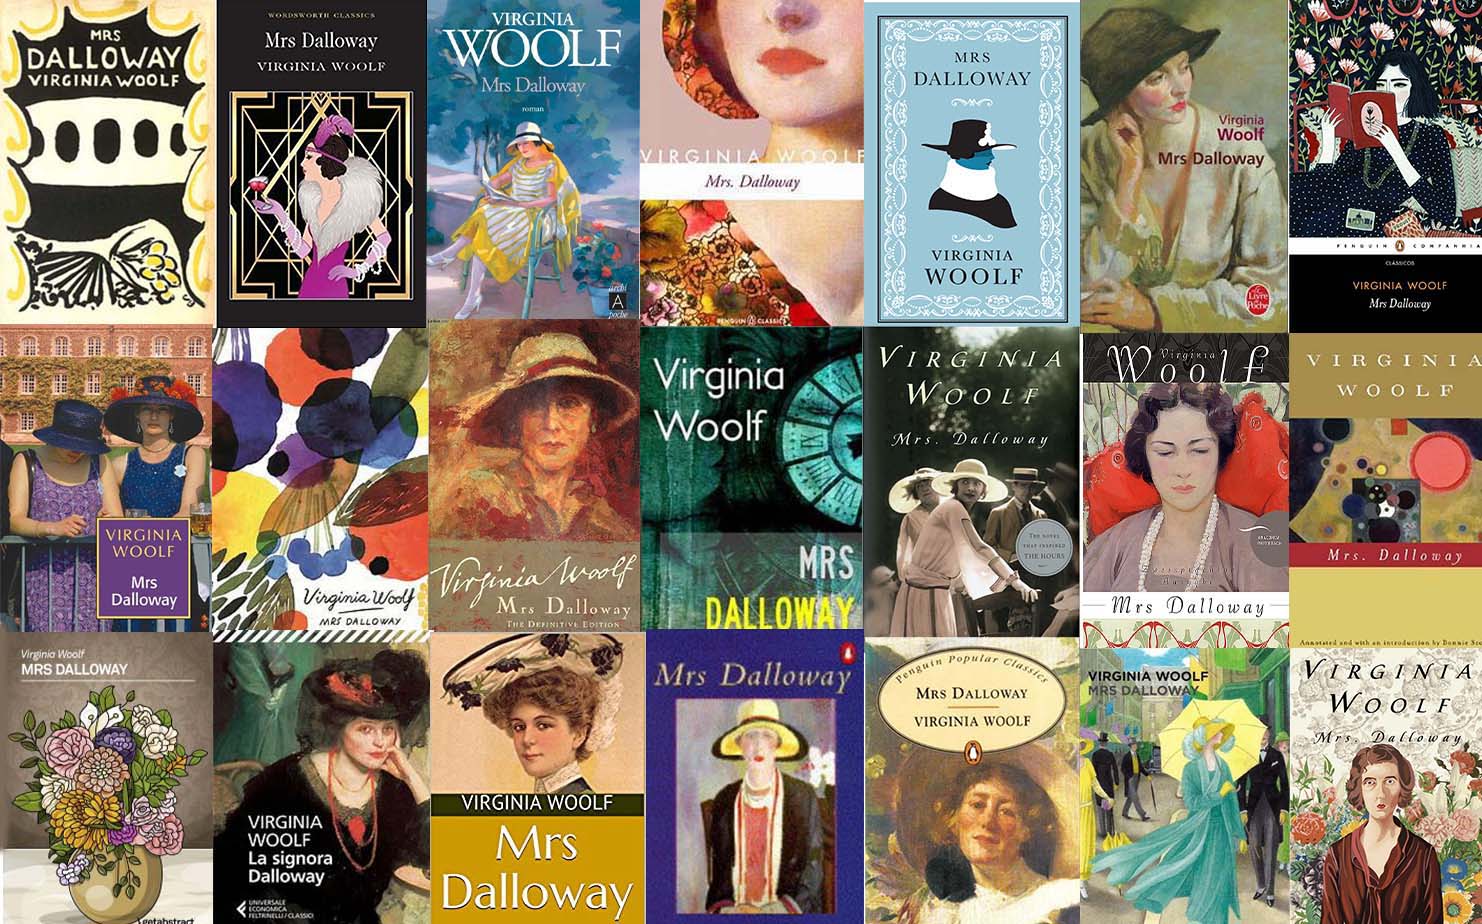 May 14, 1925: “Mrs. Dalloway” By Virginia Woolf Was Published - Lifetime